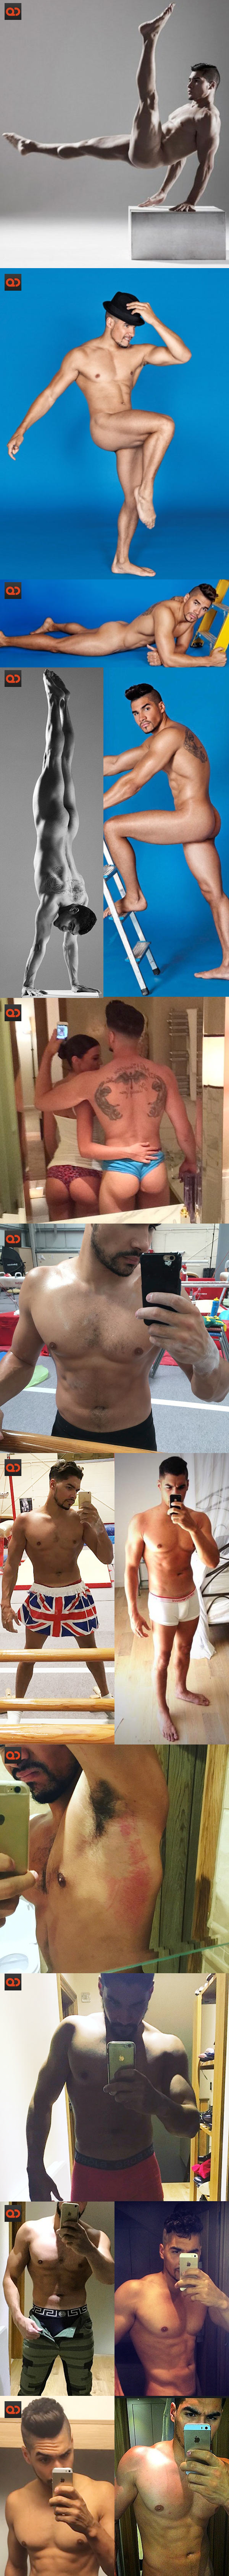 Louis Smith, Olympic Gymnast And Strictly Come Dancing Star, Cock Exposed - Nude Photos Leak!